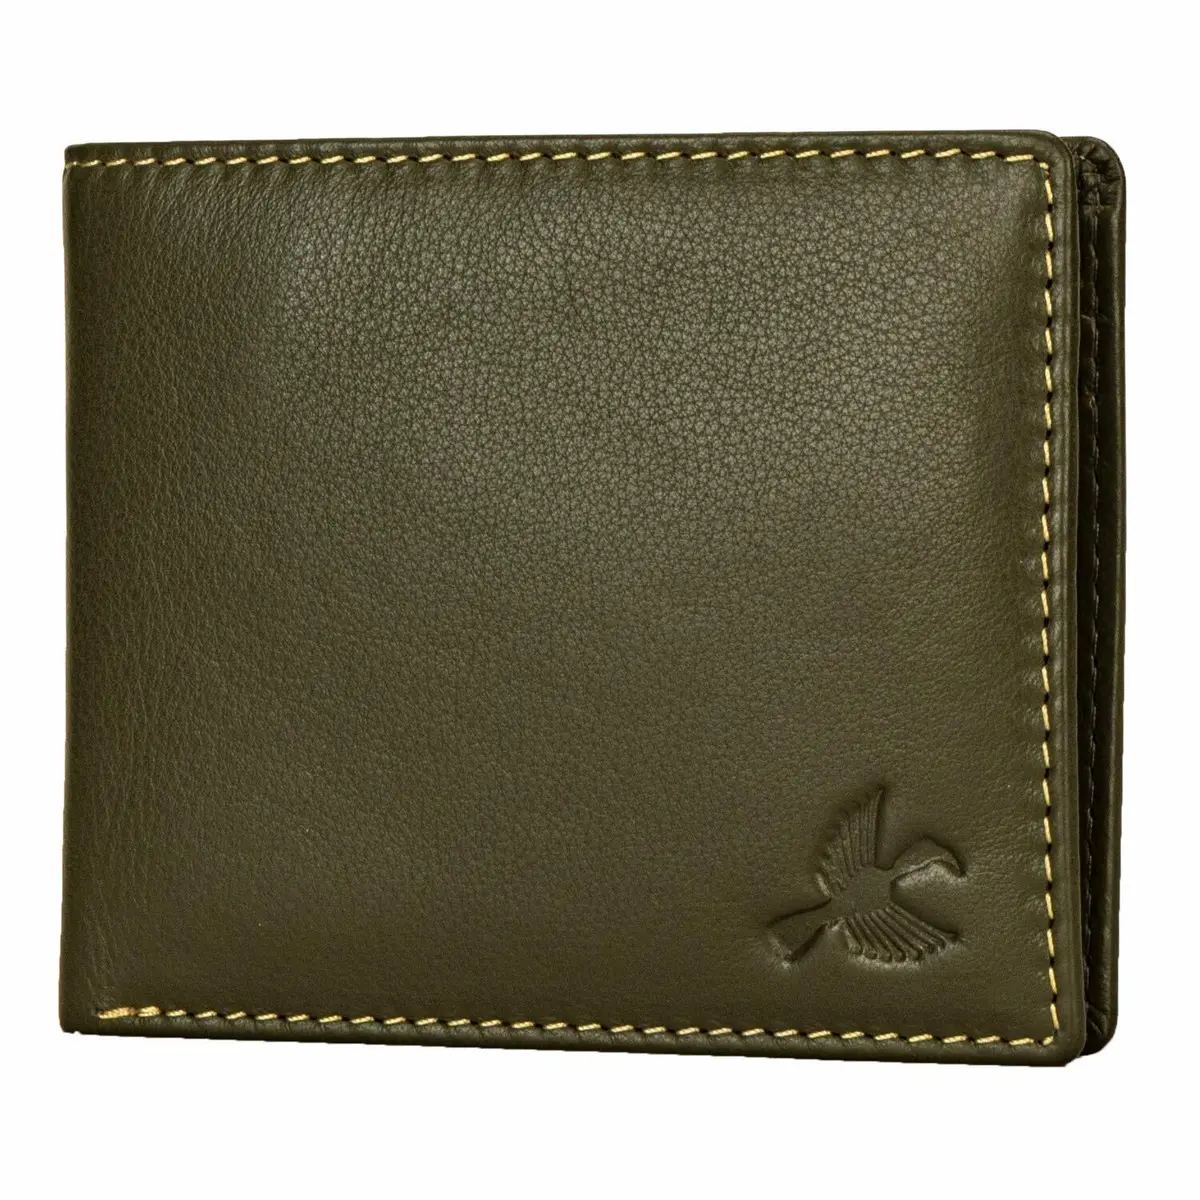 Brand New Authentic Olive Green BI-Fold Genuine Leather Mens Wallet